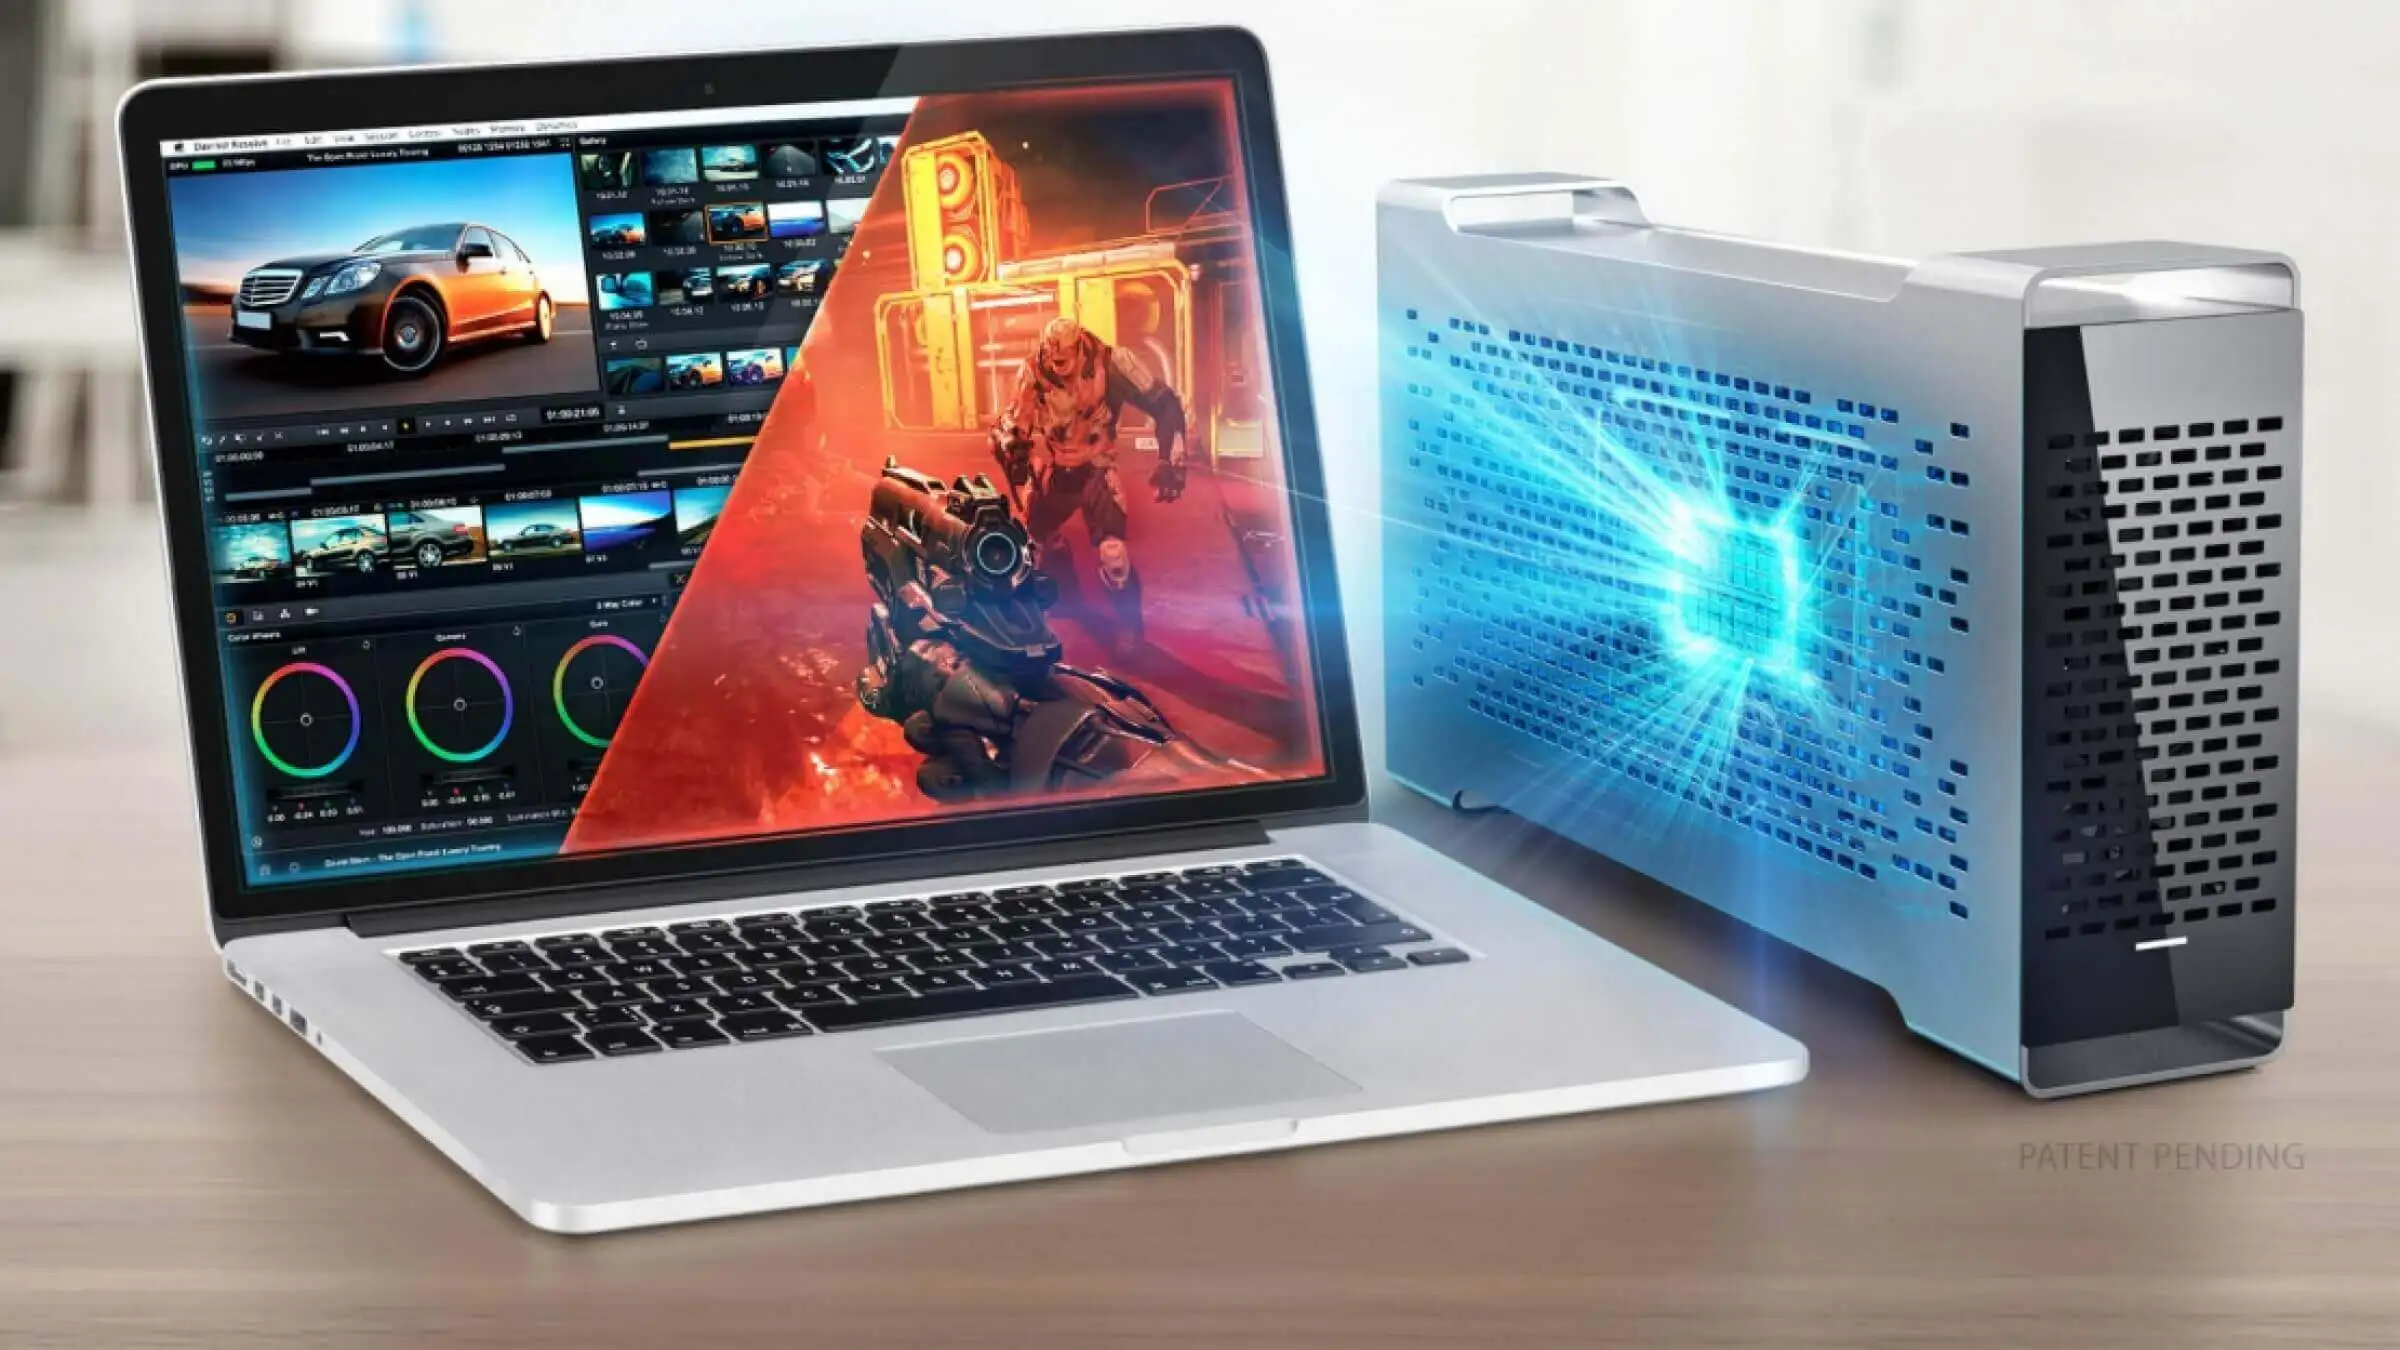 External graphics card (eGPU) Thunderbolt 3 to play videogames on the laptop NeverTheLess